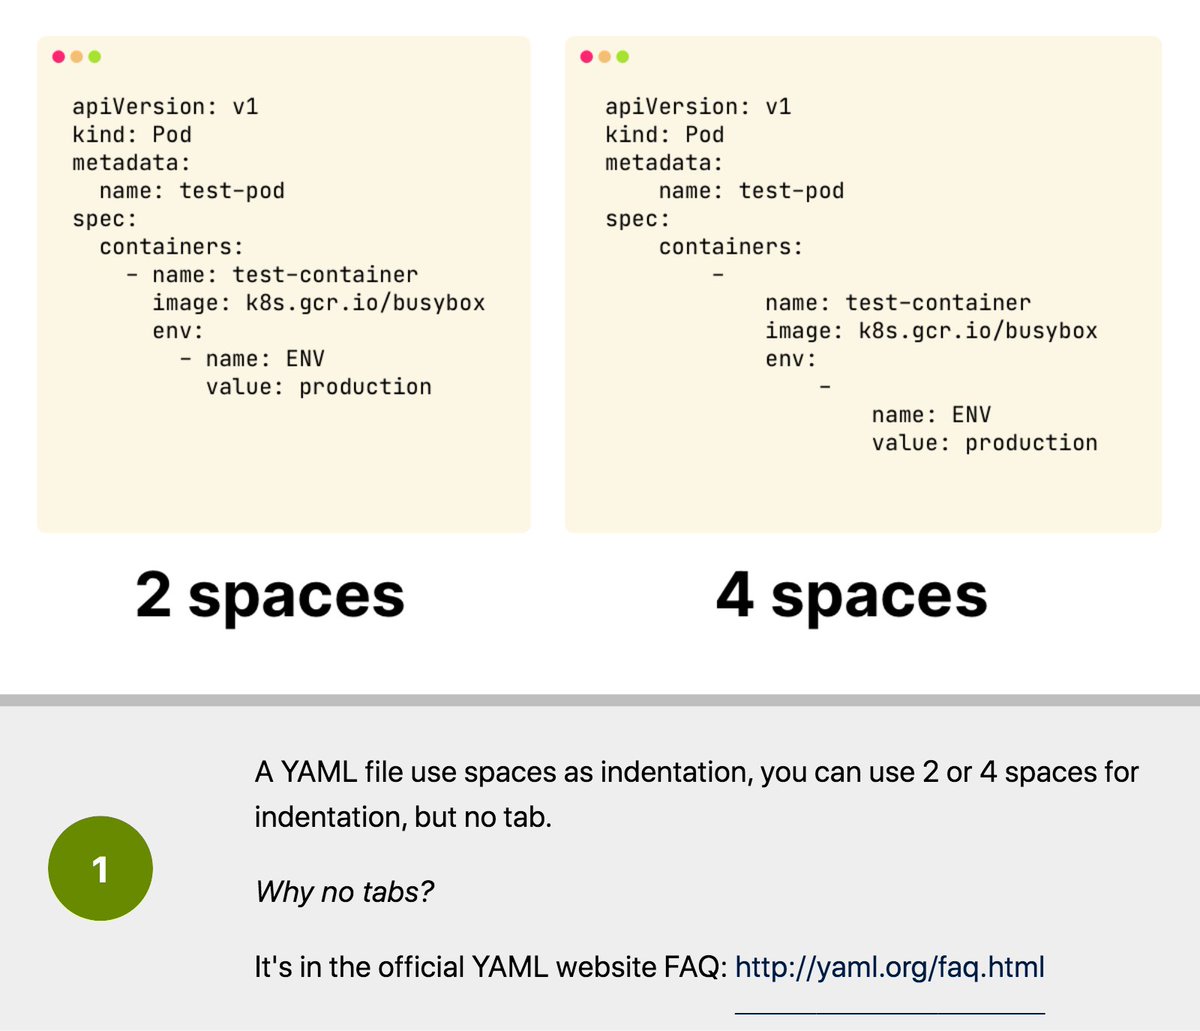 1/Let's cover the basics first.YAML has three basic rules:1. Indentation — only 2 or 4 spaces2. Maps — key-value pairs3. Lists — collections of things